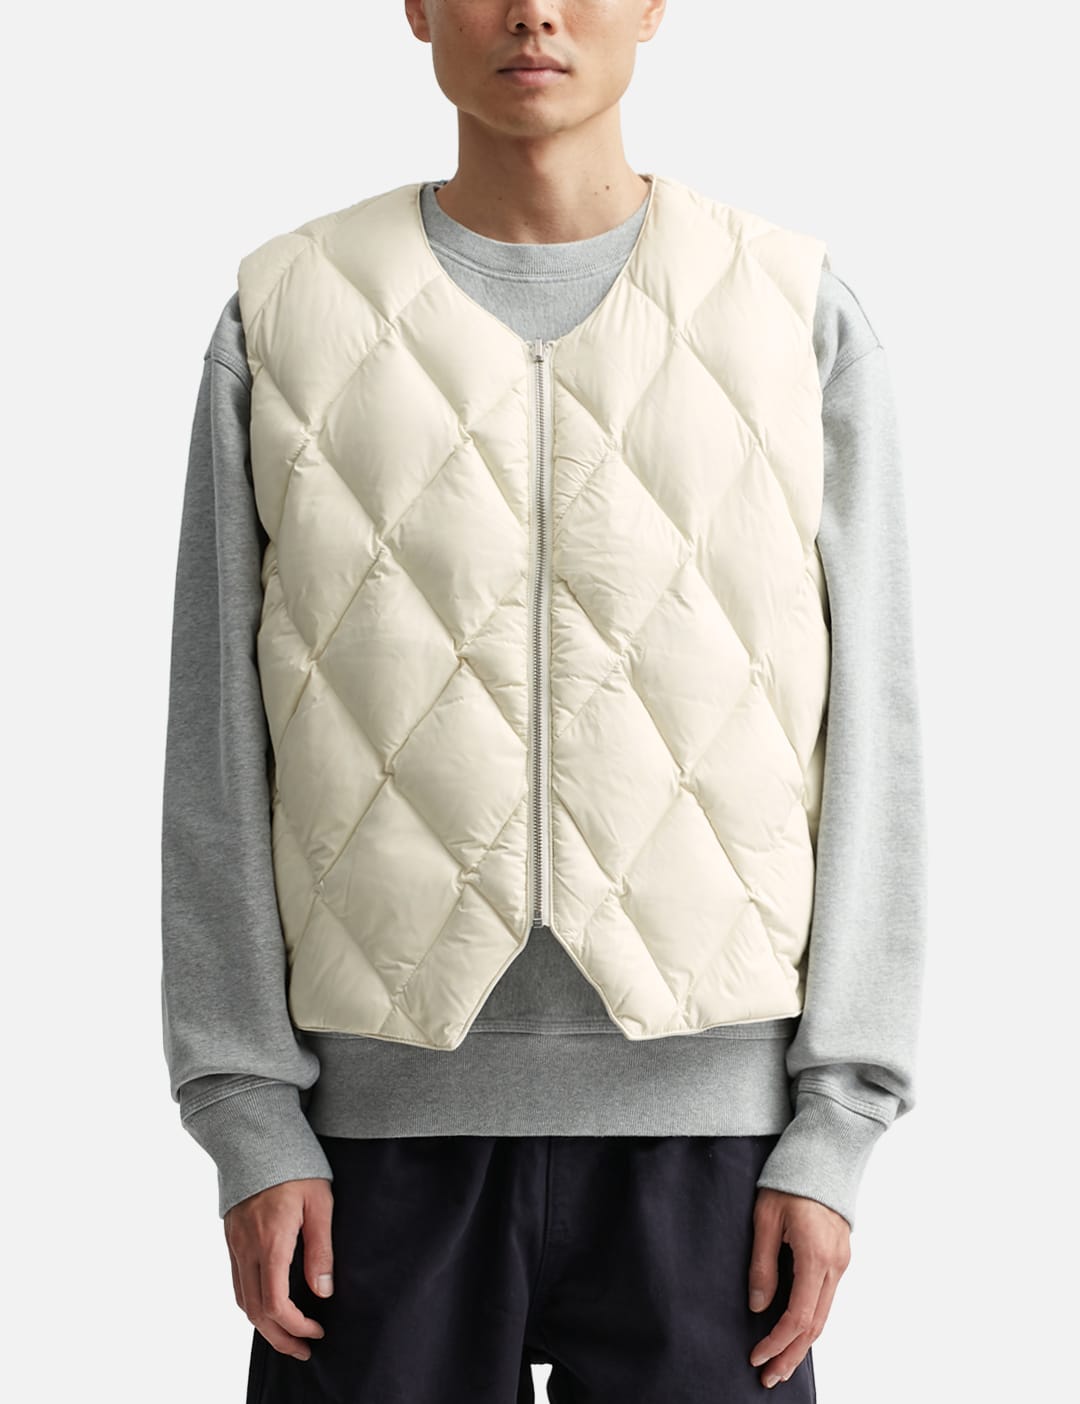 Stüssy - Reversible Quilted Vest | HBX - Globally Curated Fashion